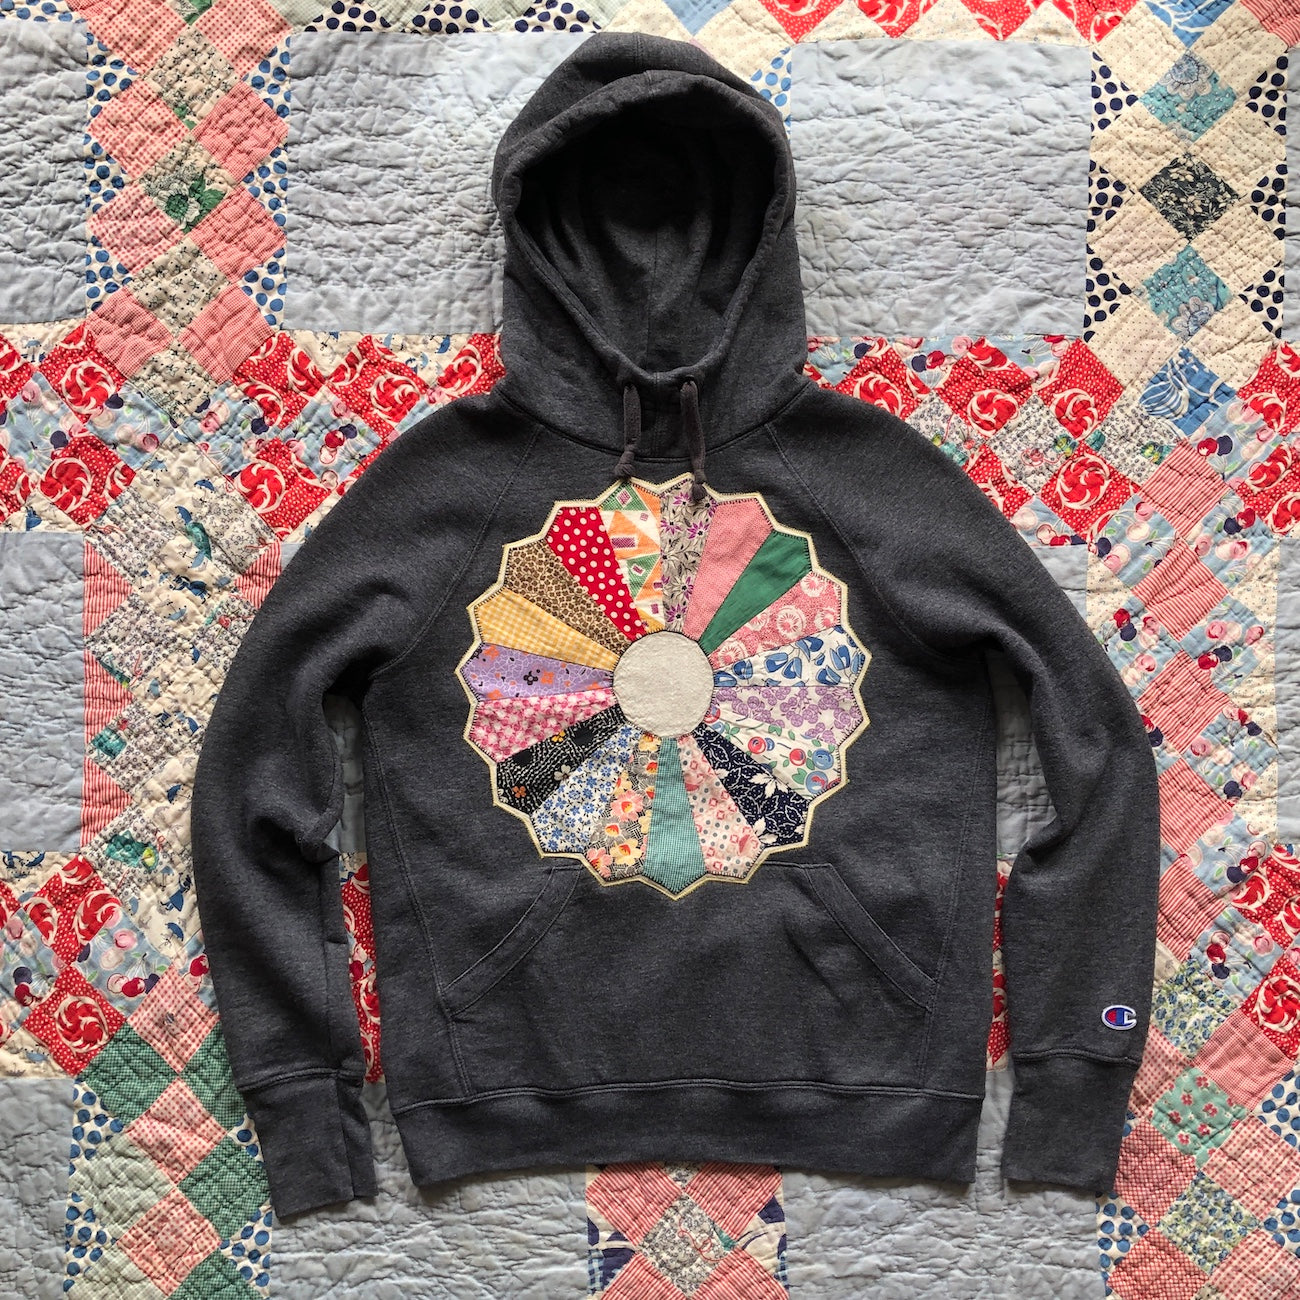 Women's dark gray hoodie with Dresden Plate vintage quilt patch sewn to front by Flower Supernova.